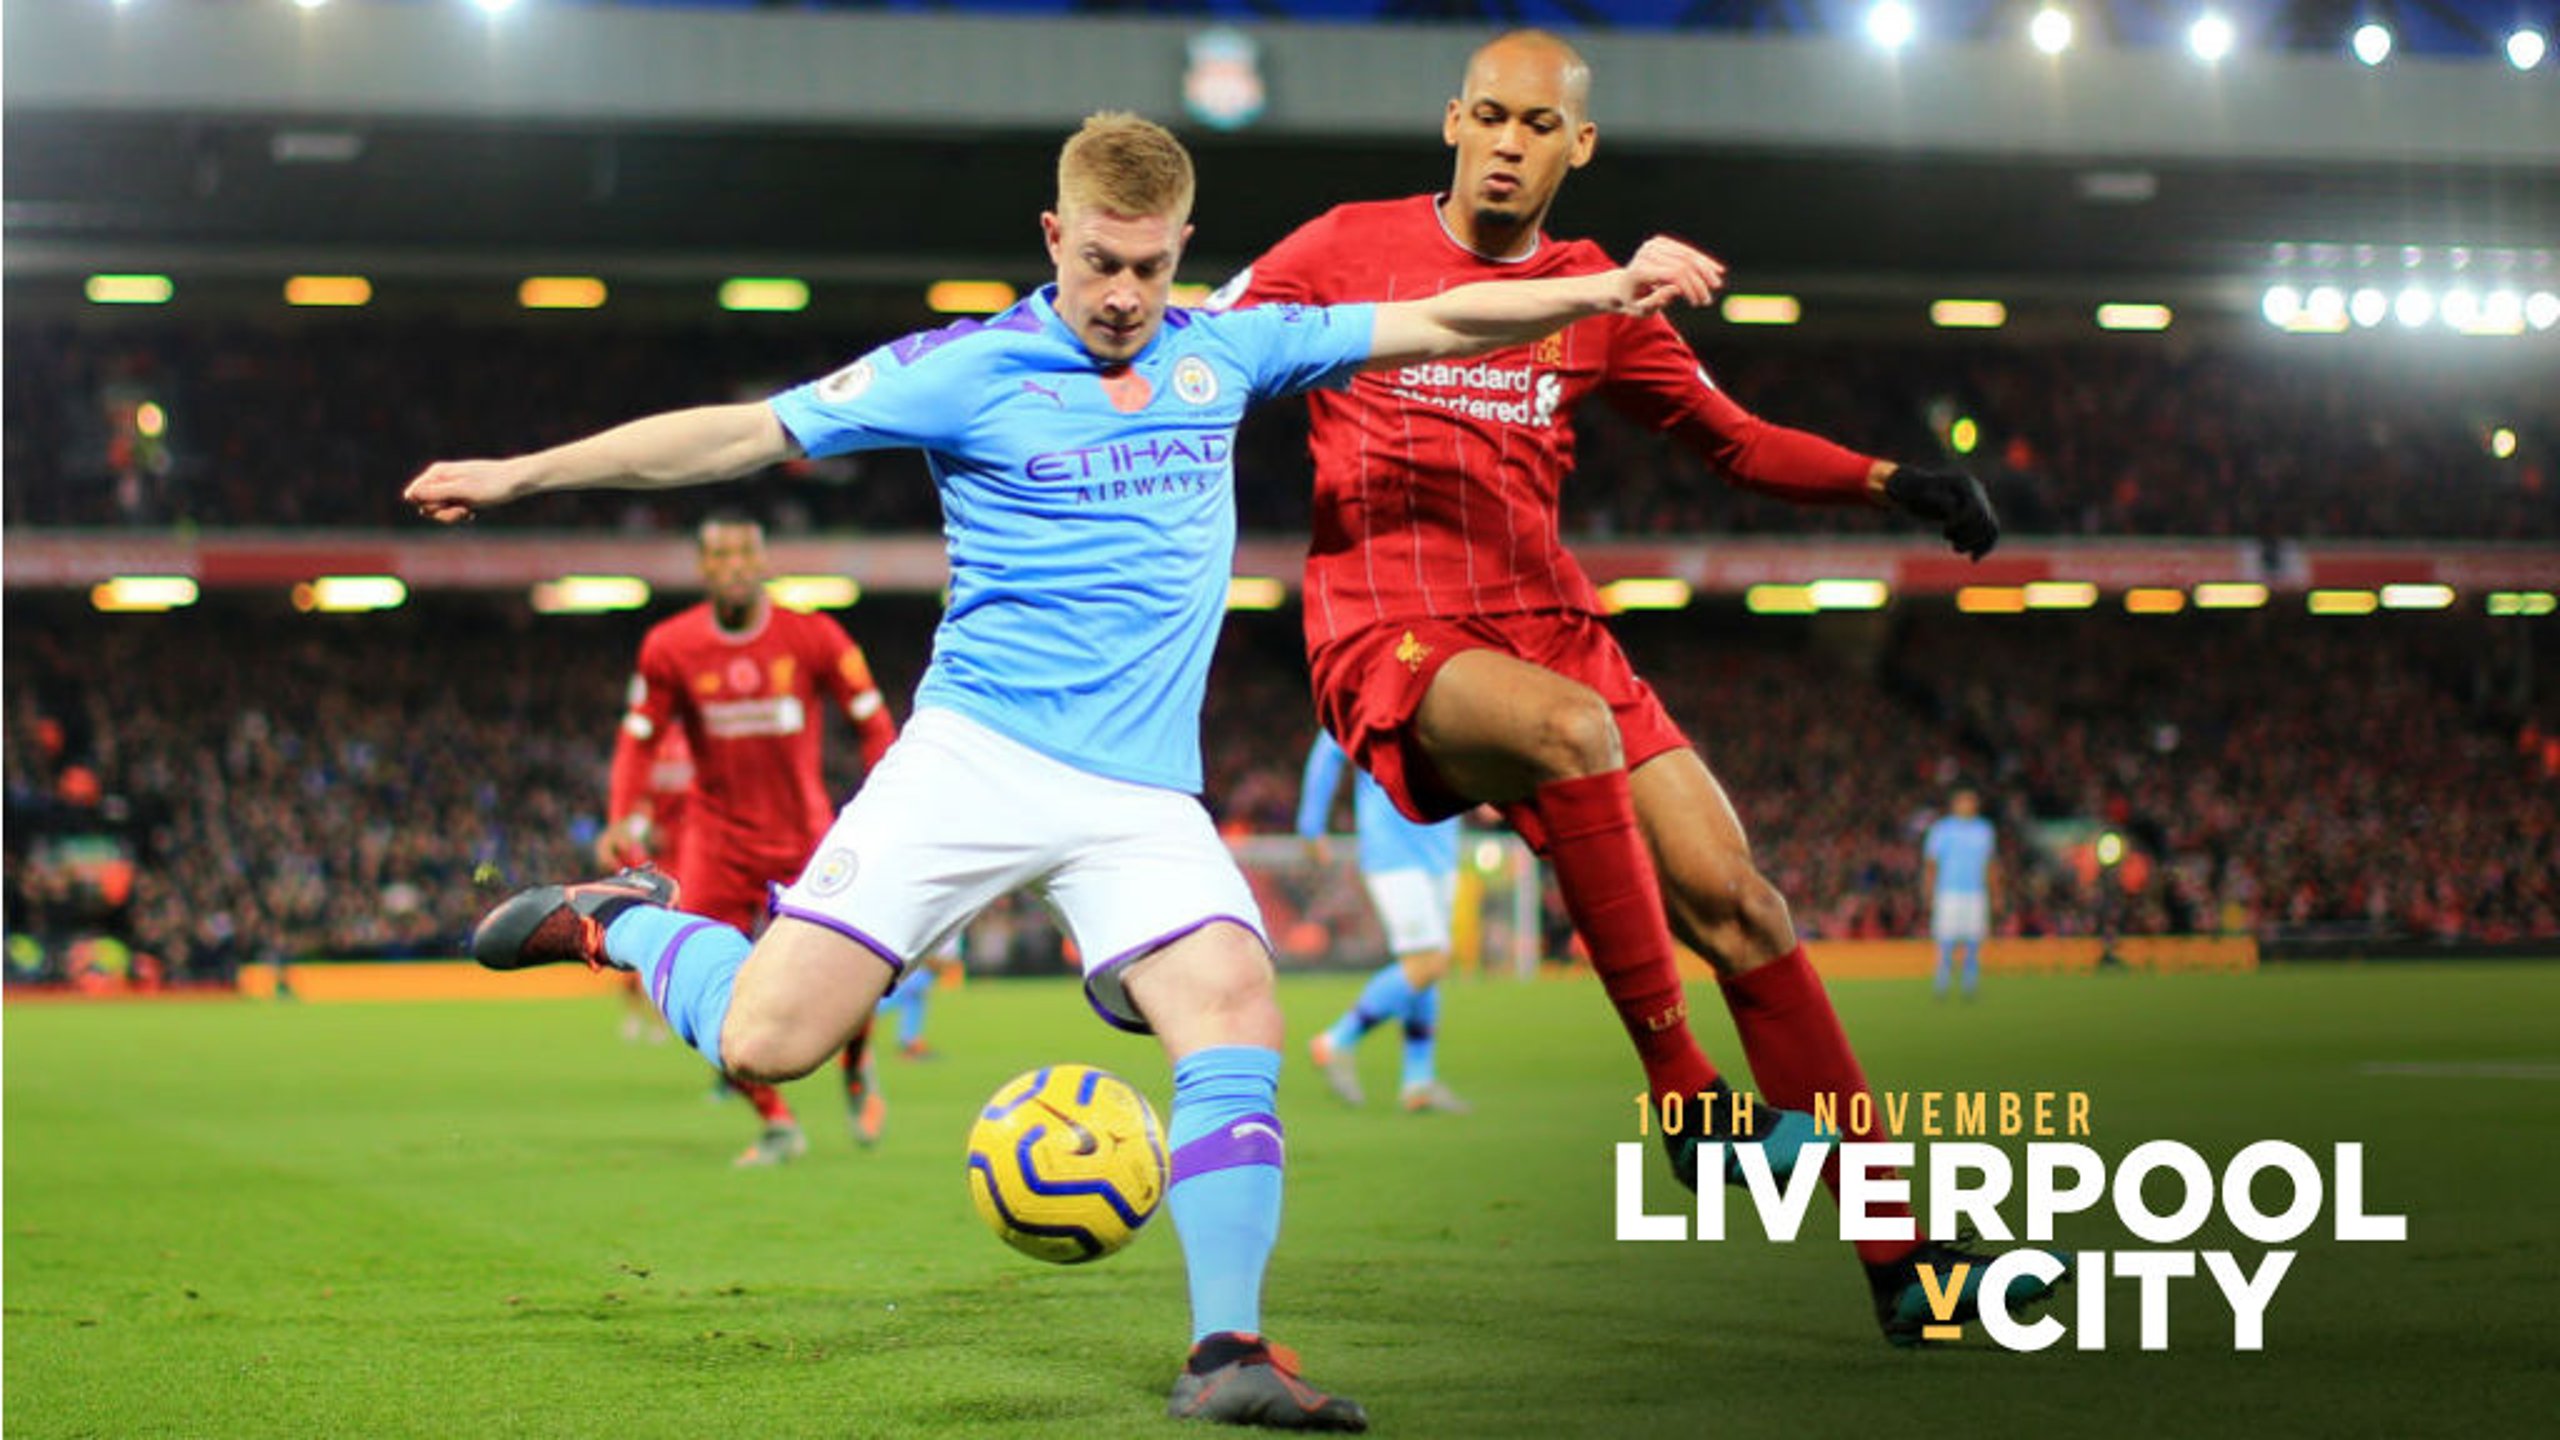 City suffer Anfield disappointment